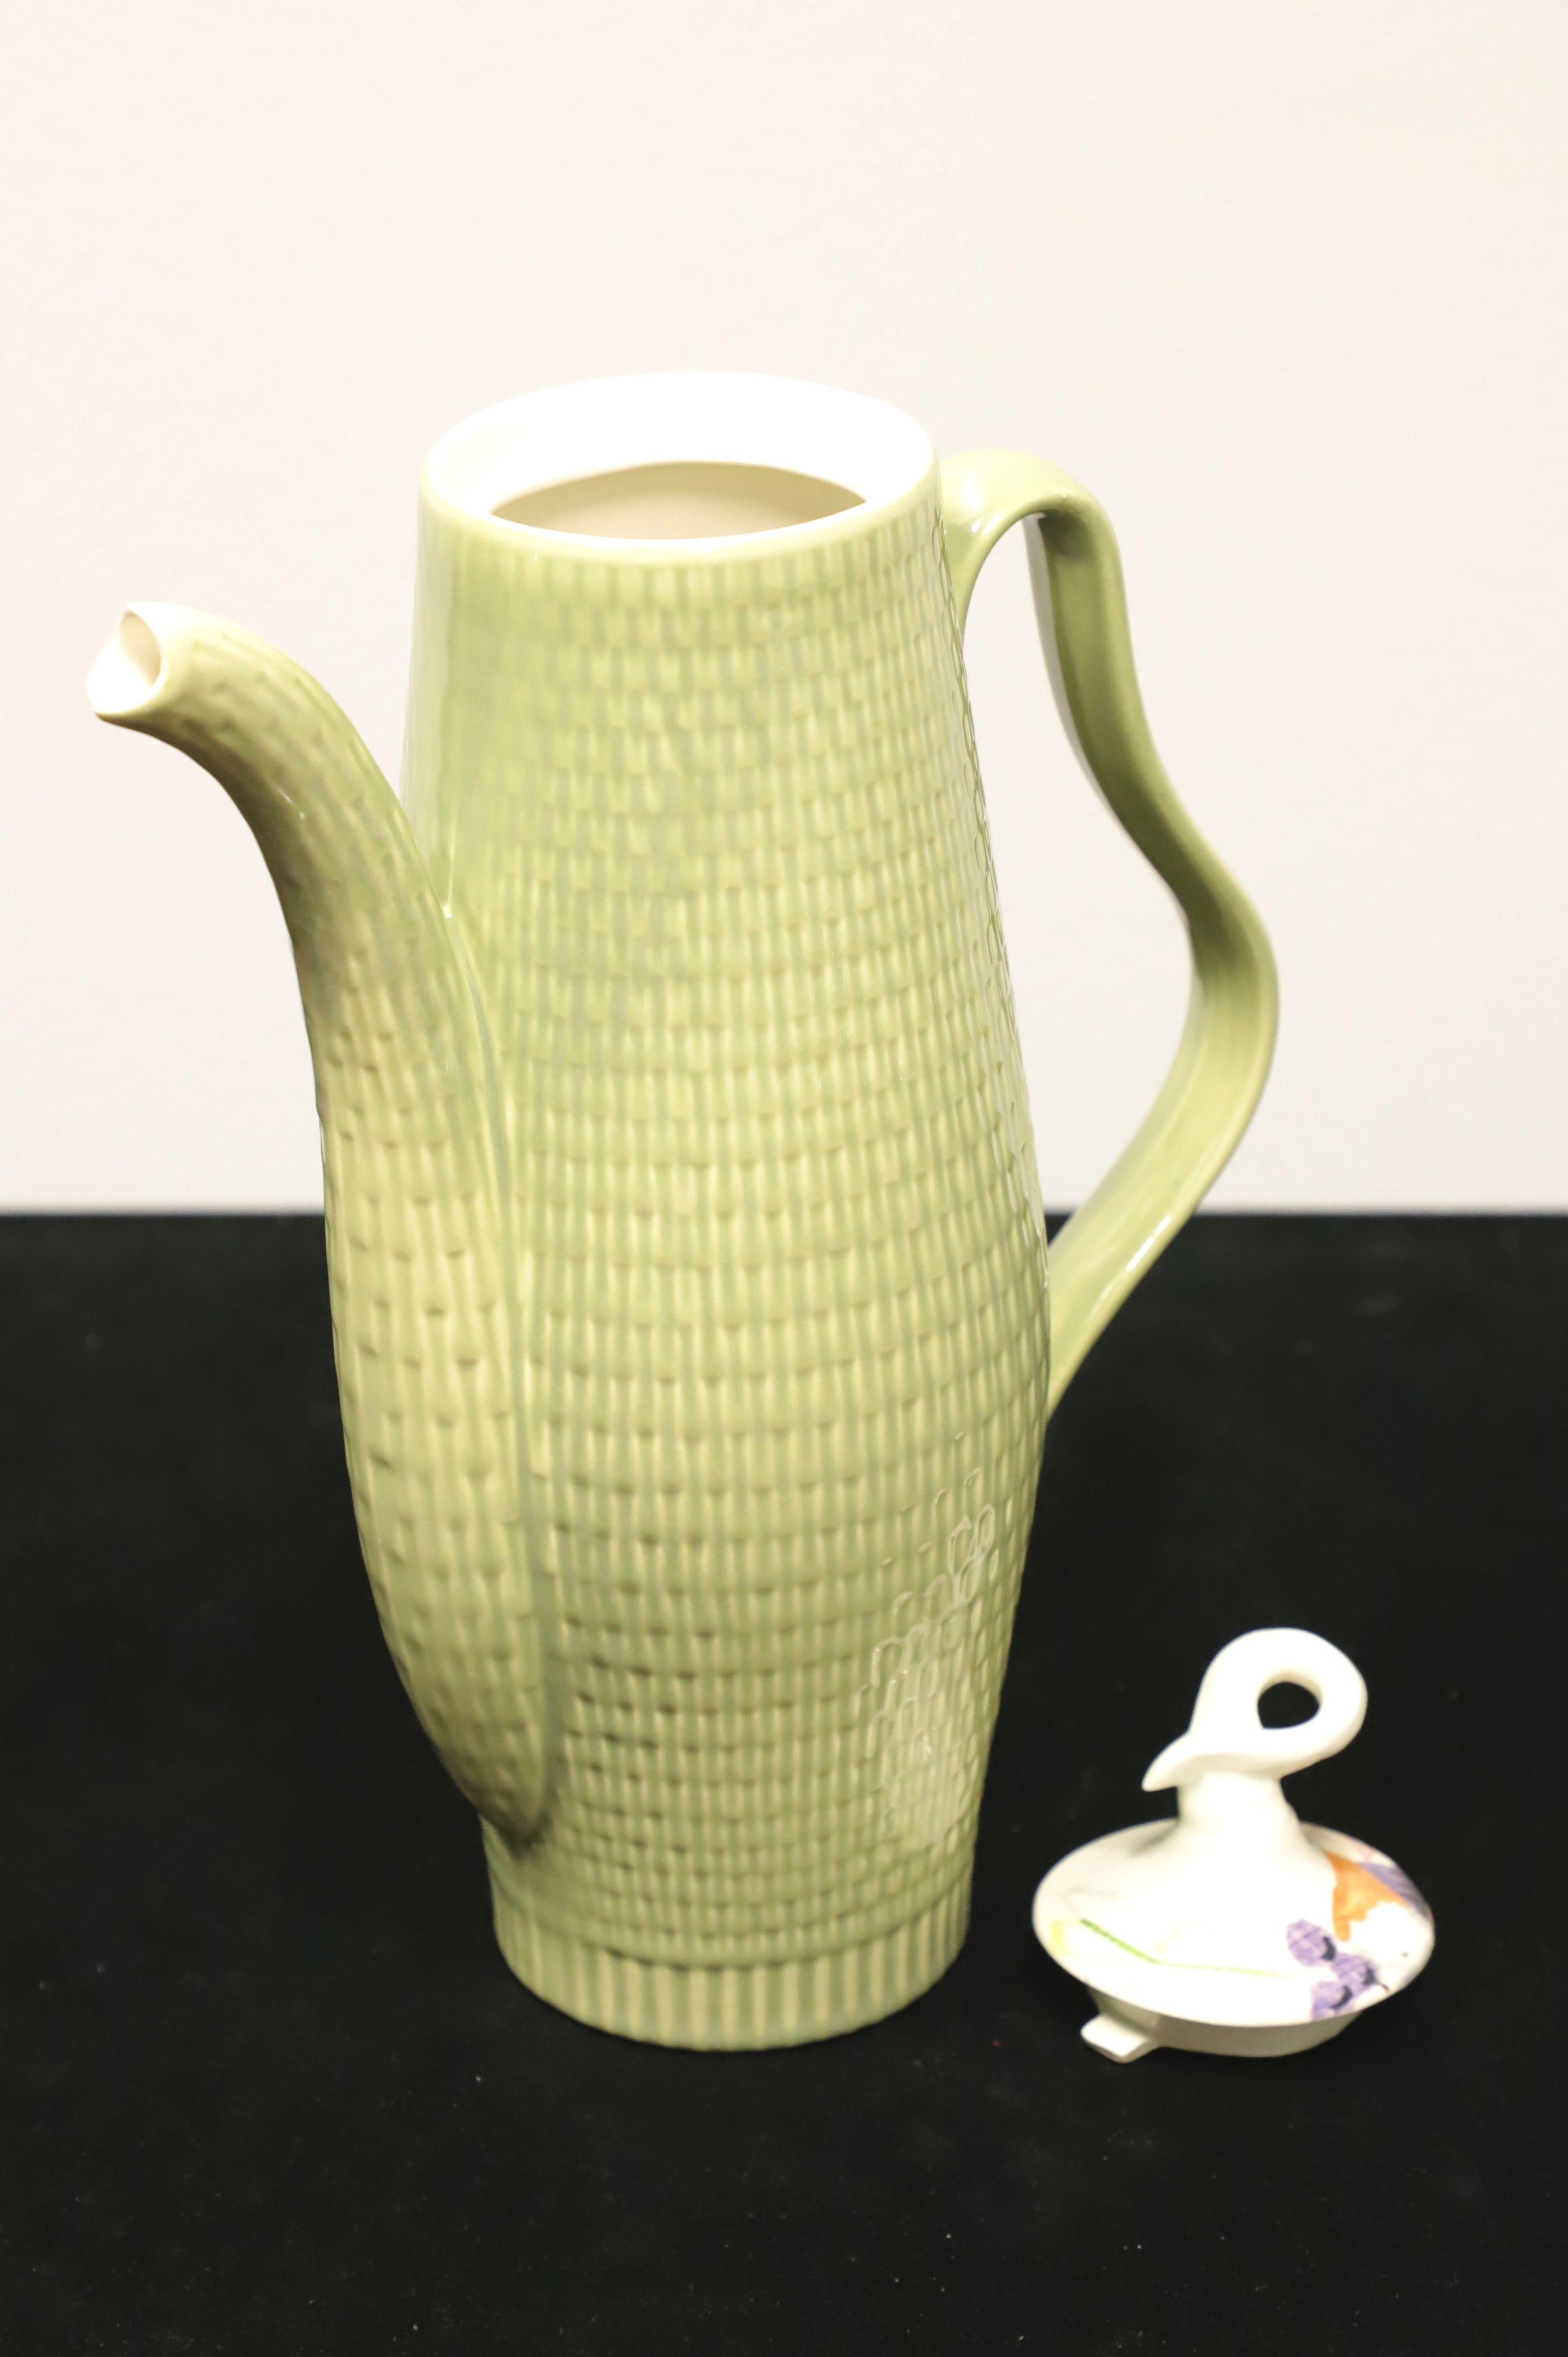 A Mid 20th Century coffee pot with lid by red wing, in their Capistrano pattern. Pot has a tall cylindrical shape, smooth cream color interior and sage green color basket weave exterior, pour spout & handle. Lid has a unique curled stem-like handle